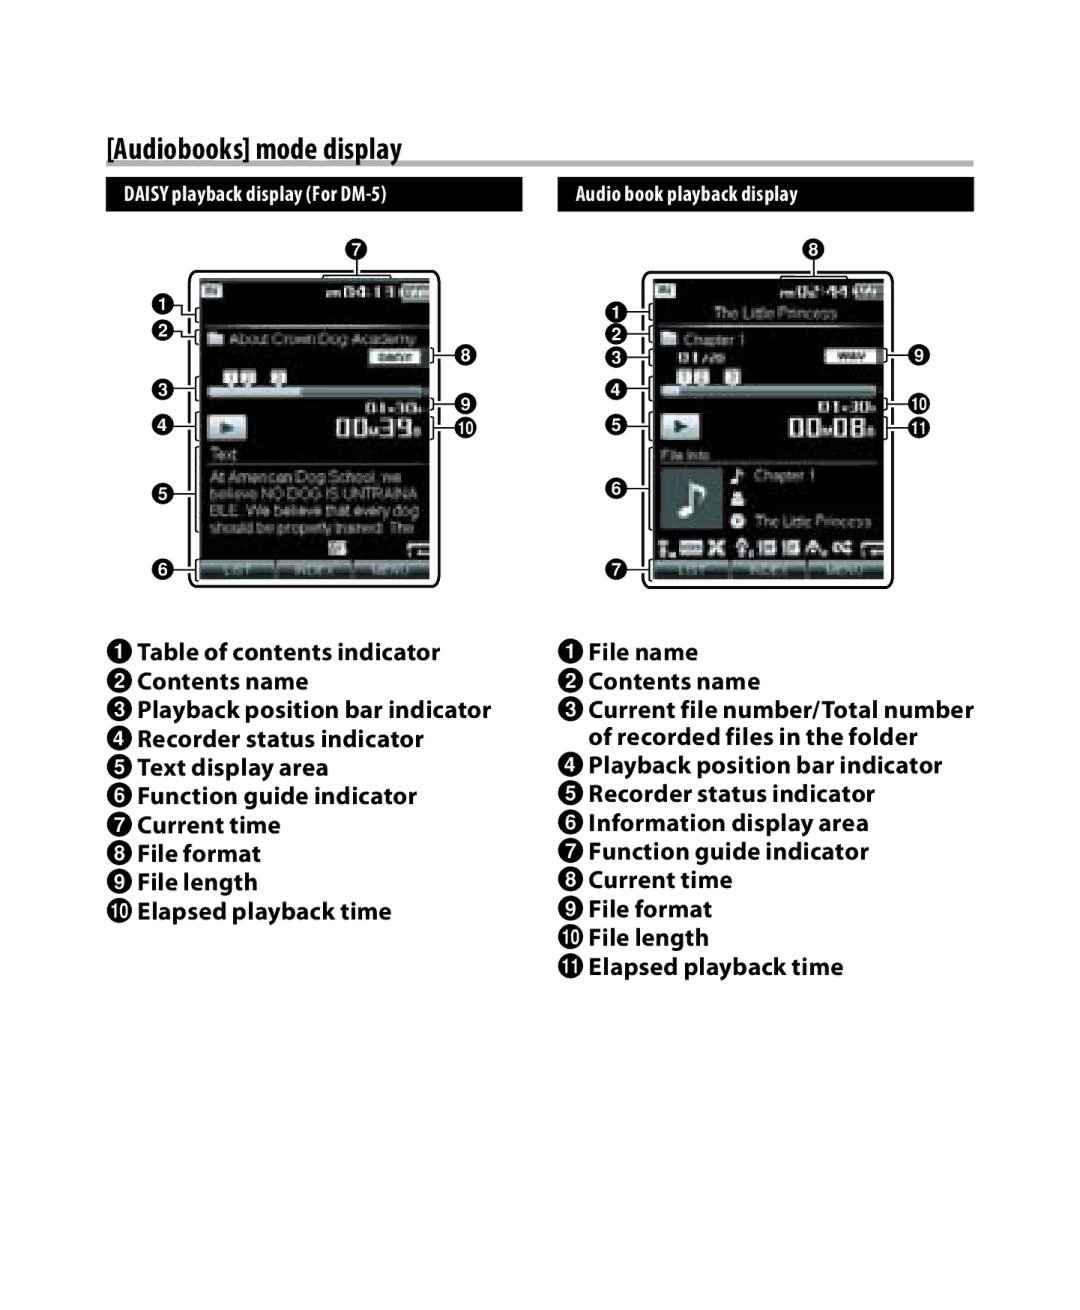 Olympus DM-3 manual Audiobooks mode display, 1File name 2Contents name, Daisy playback display For DM-5 